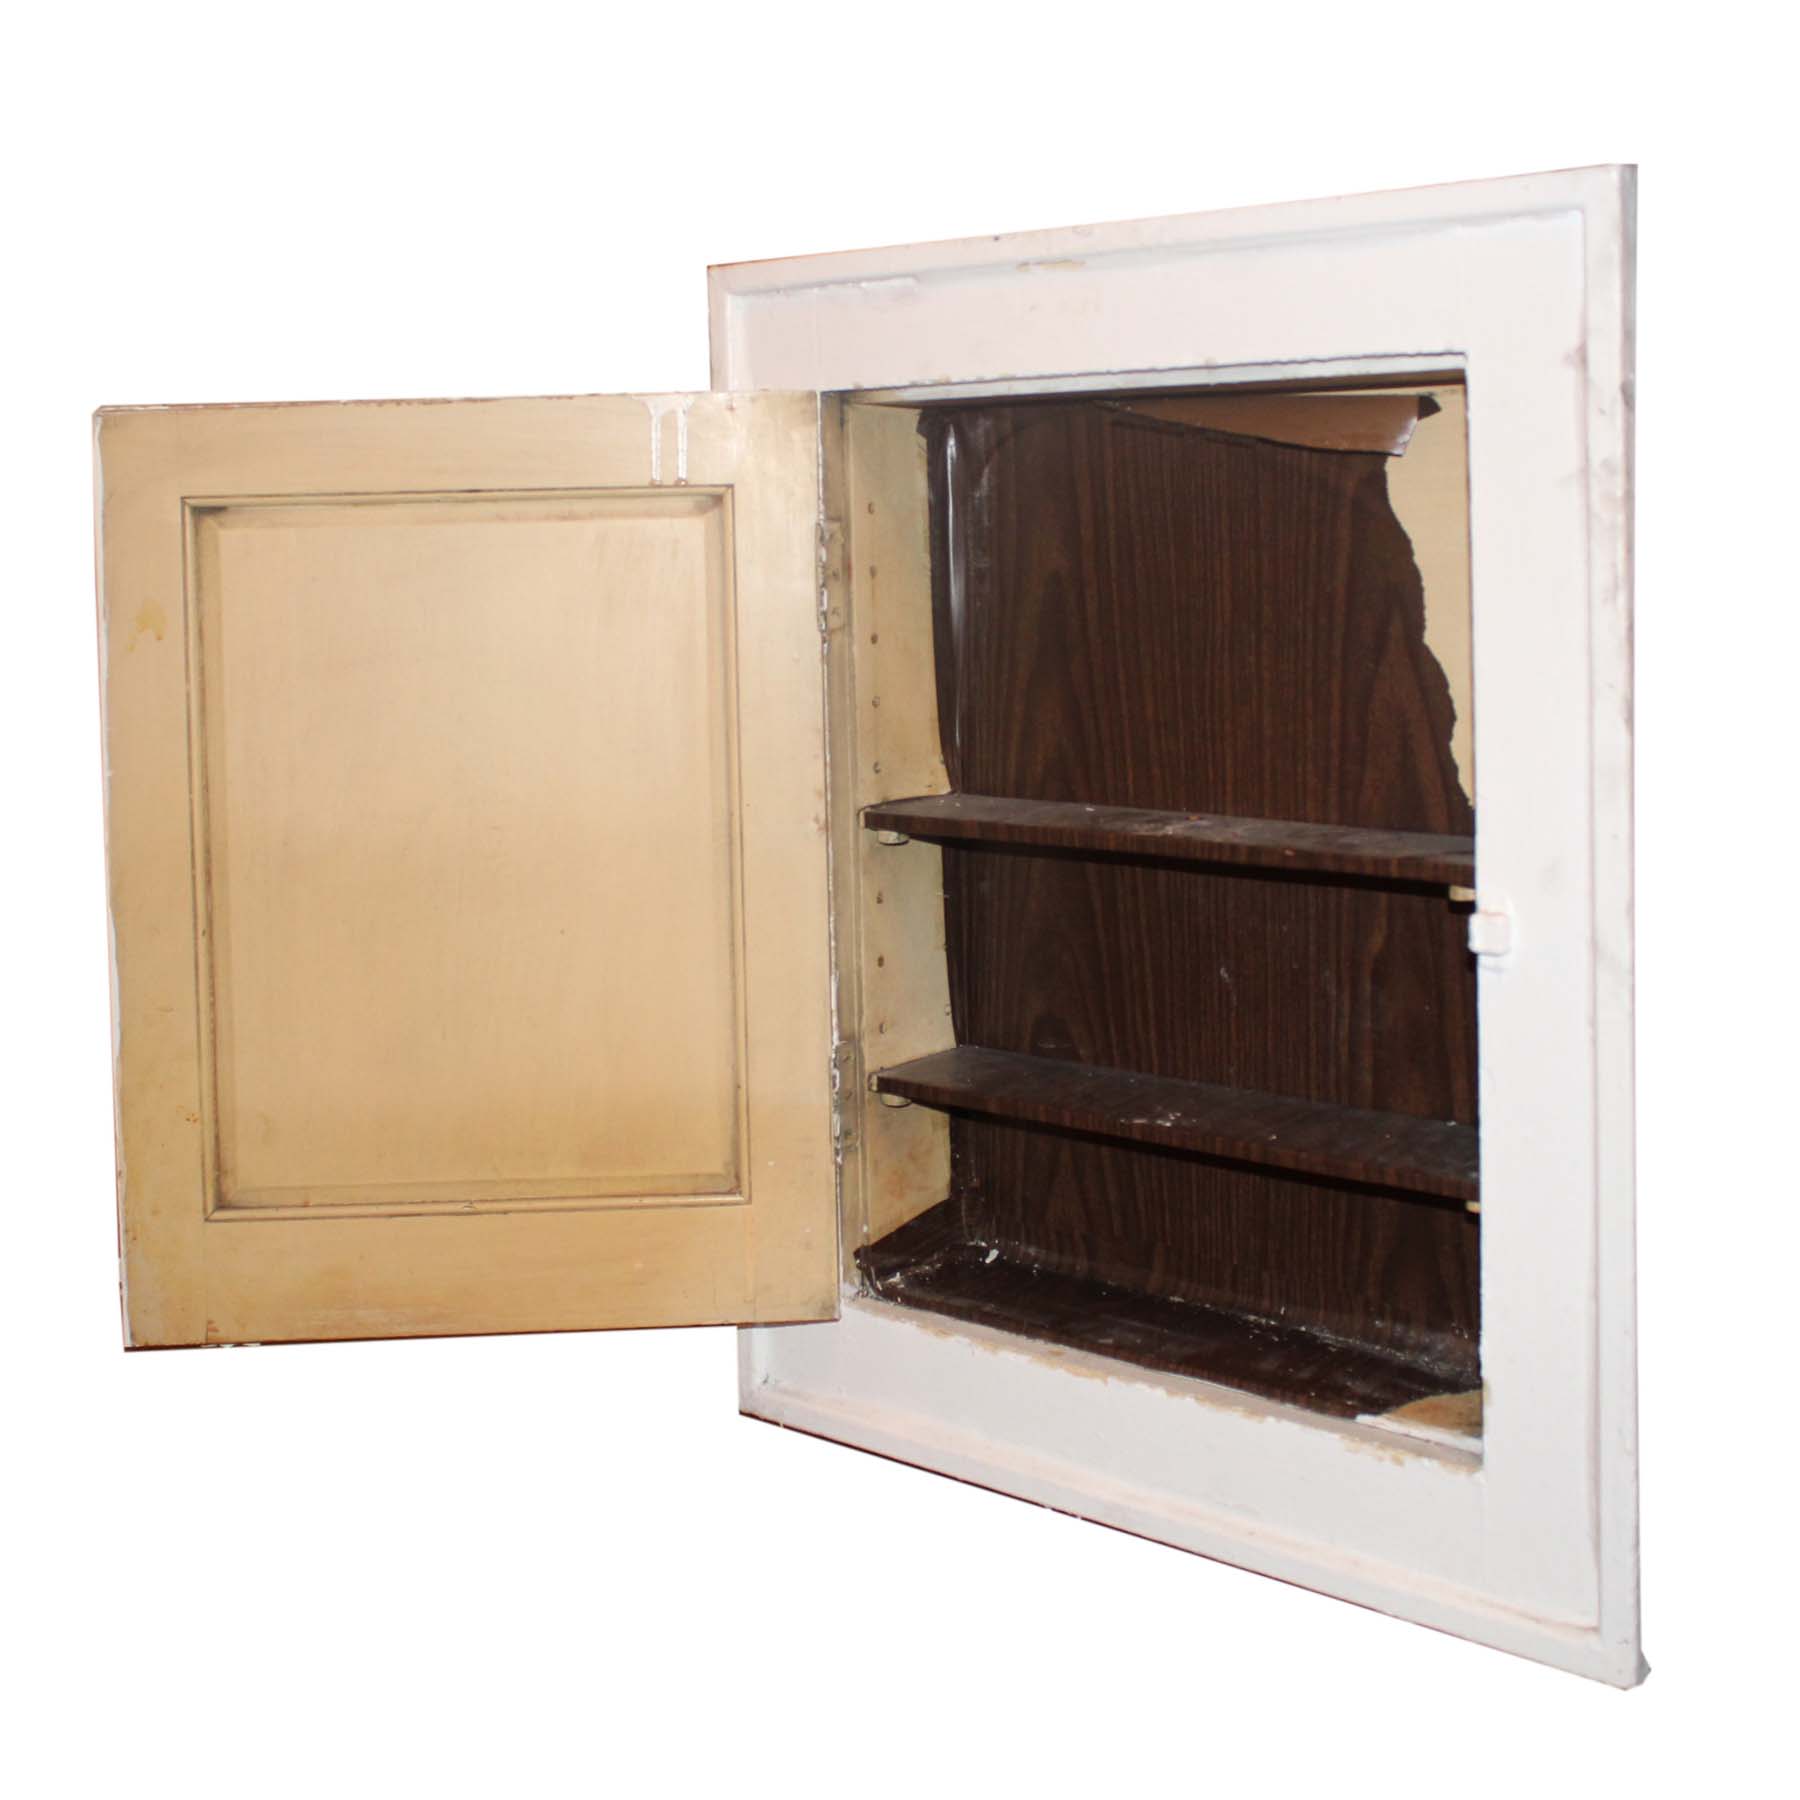 SOLD Reclaimed Antique Bathroom Medicine Cabinet with Beveled Mirror, Early 1900’s-66837